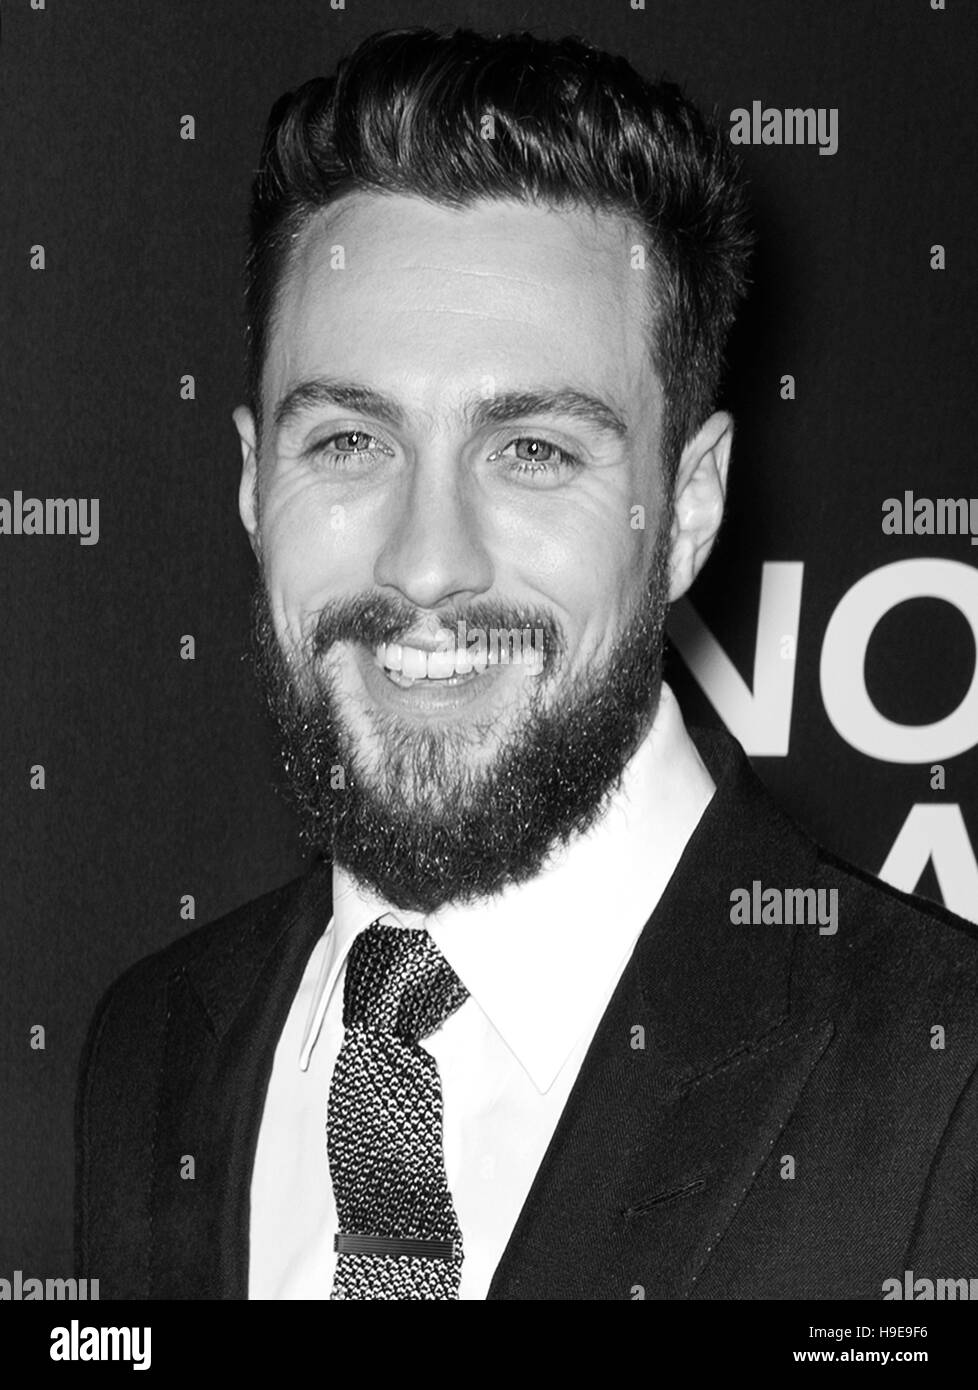 New York City, USA - November 17, 2016: Actor Aaron Taylor-Johnson attends the 'Nocturnal Animals' New York premiere held at The Paris Theatre Stock Photo